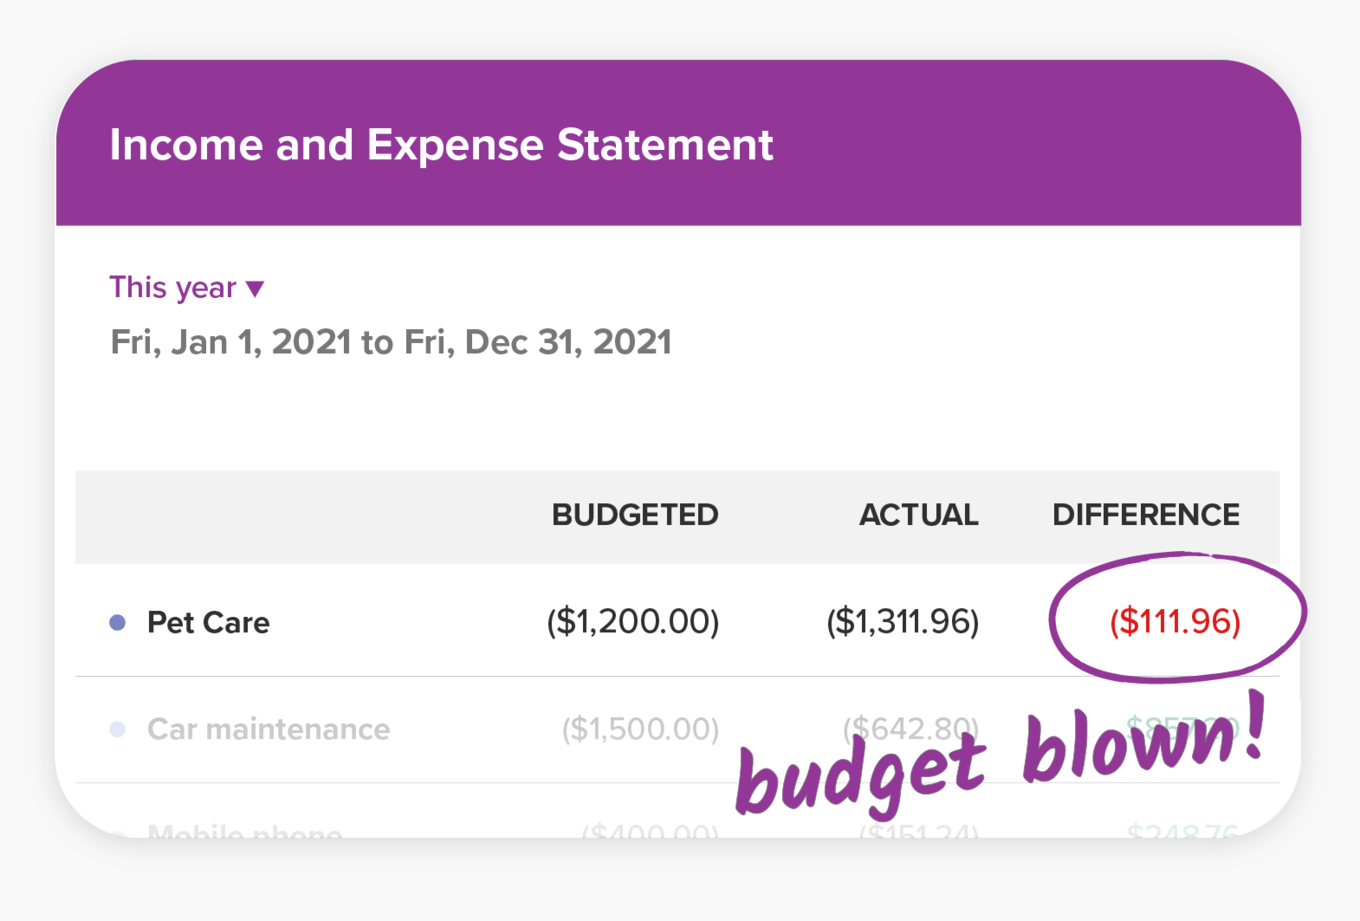 PocketSmith Income & Expense Statement showing pet care budget blow out